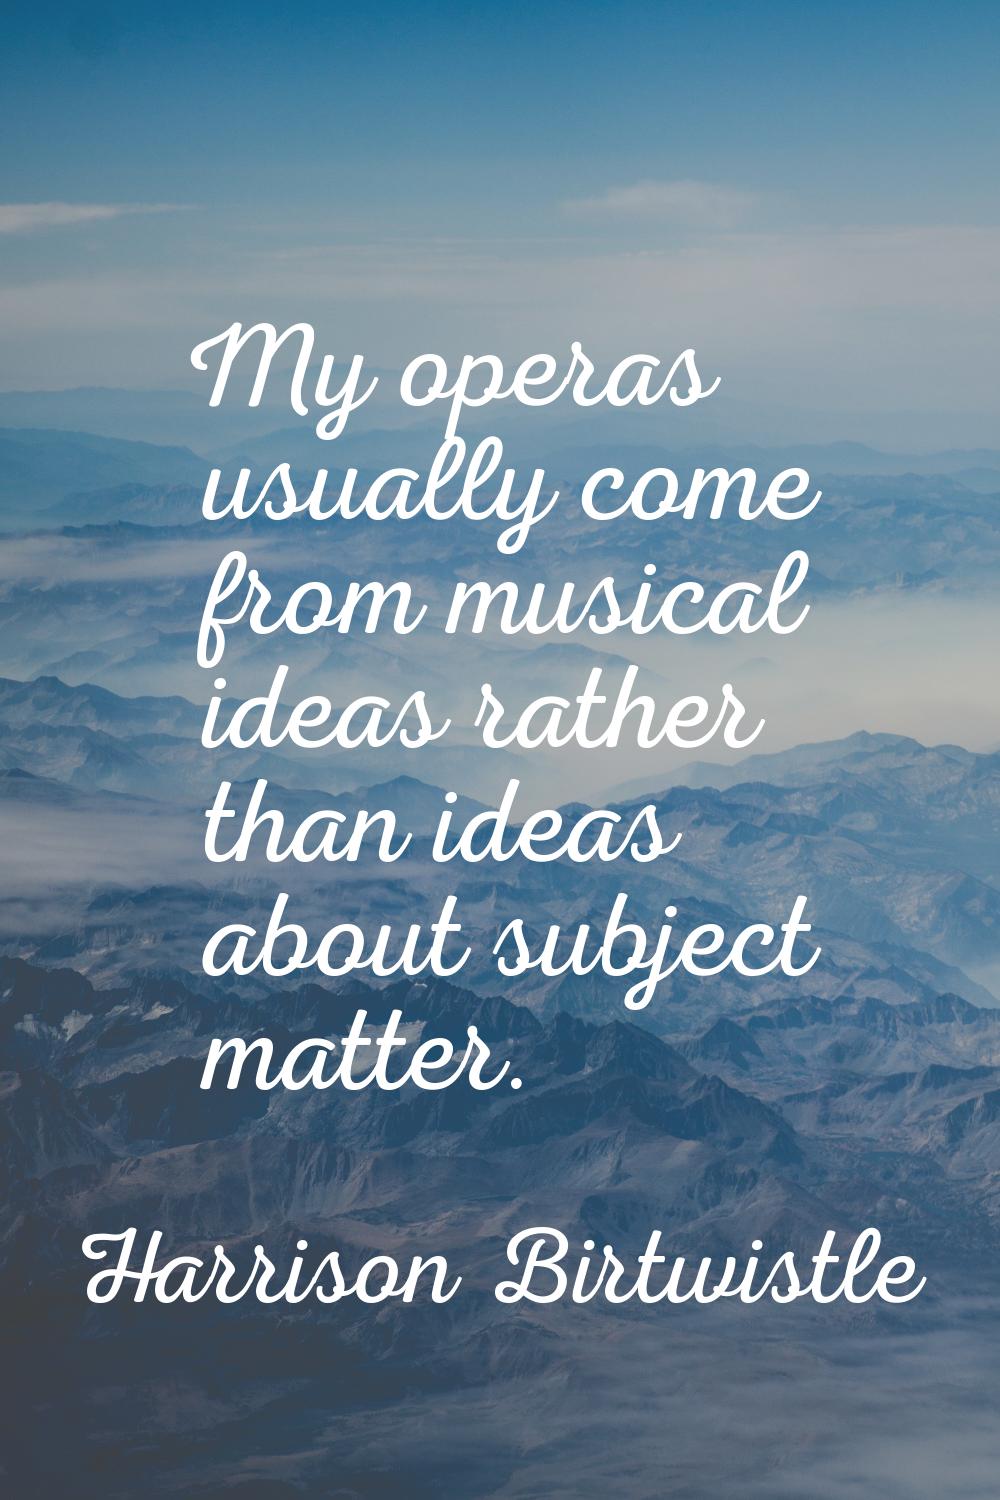 My operas usually come from musical ideas rather than ideas about subject matter.